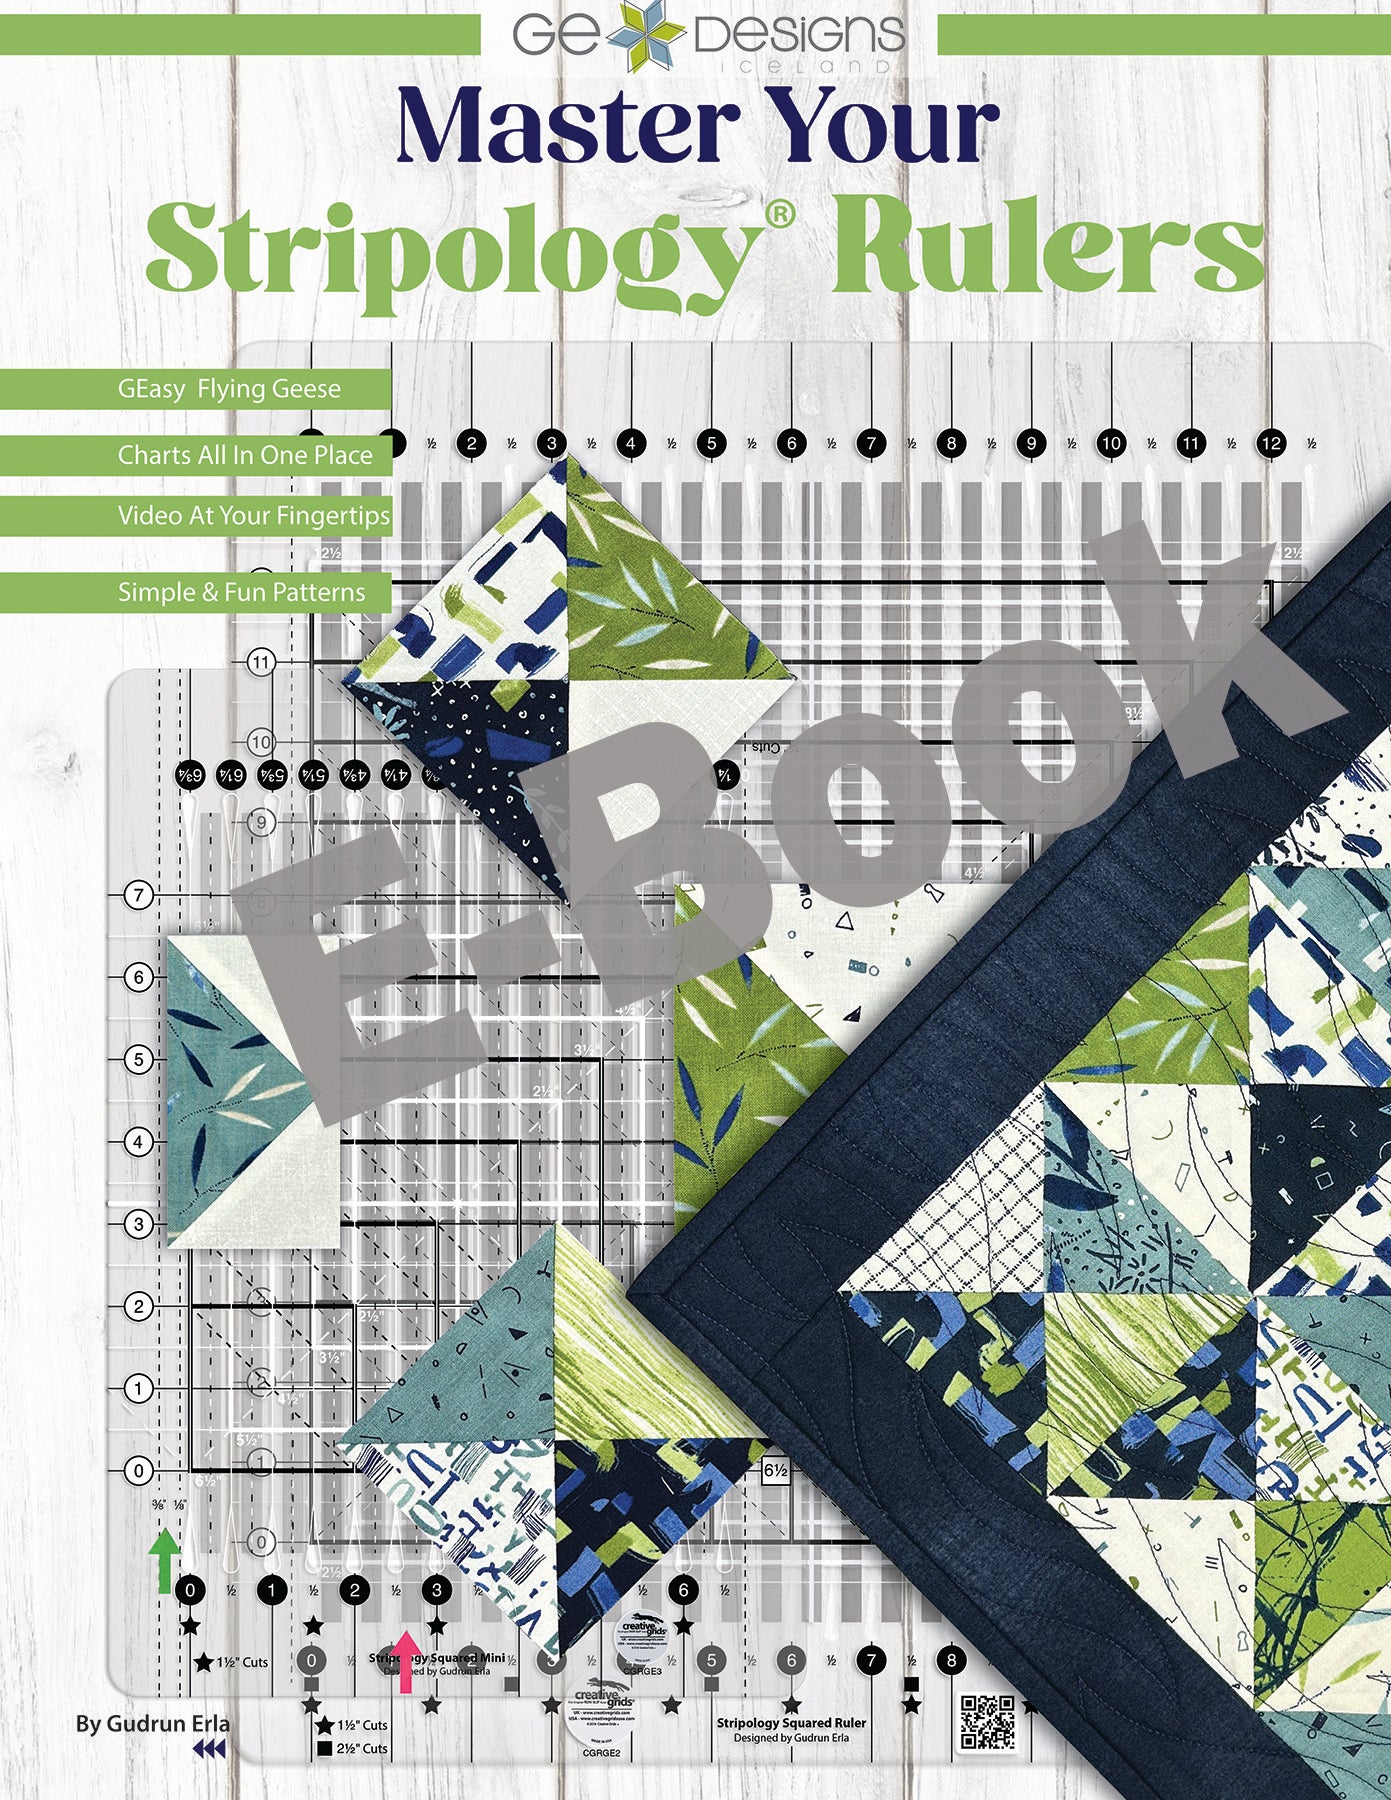 How to use the Stripology Ruler 